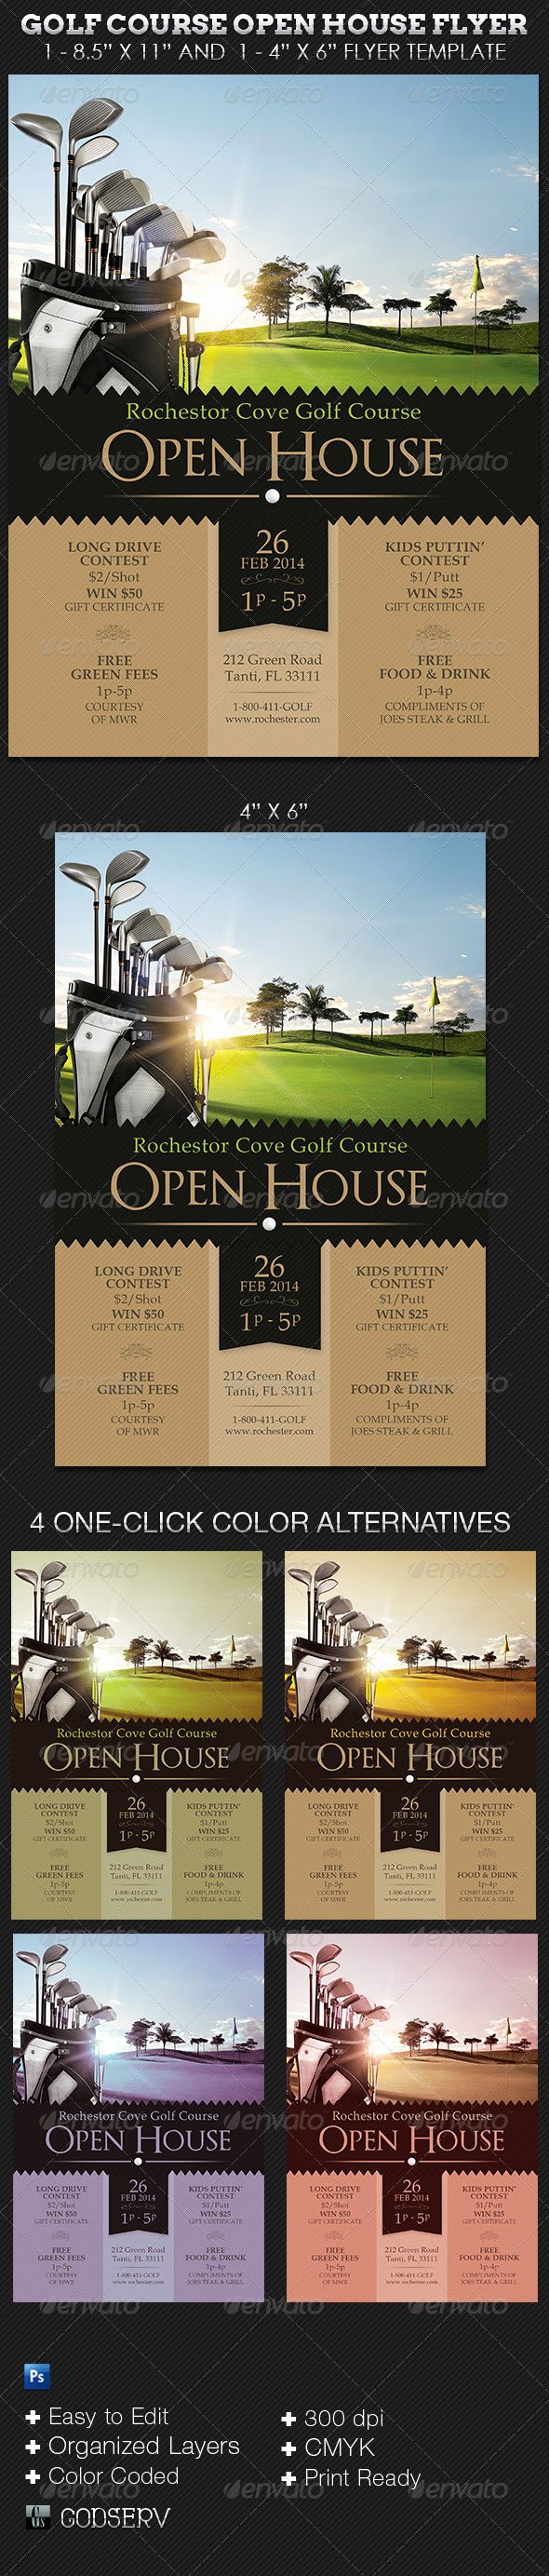 Golf Flyer Template Free Lovely Golf Course Open House Flyer Templates On Behance